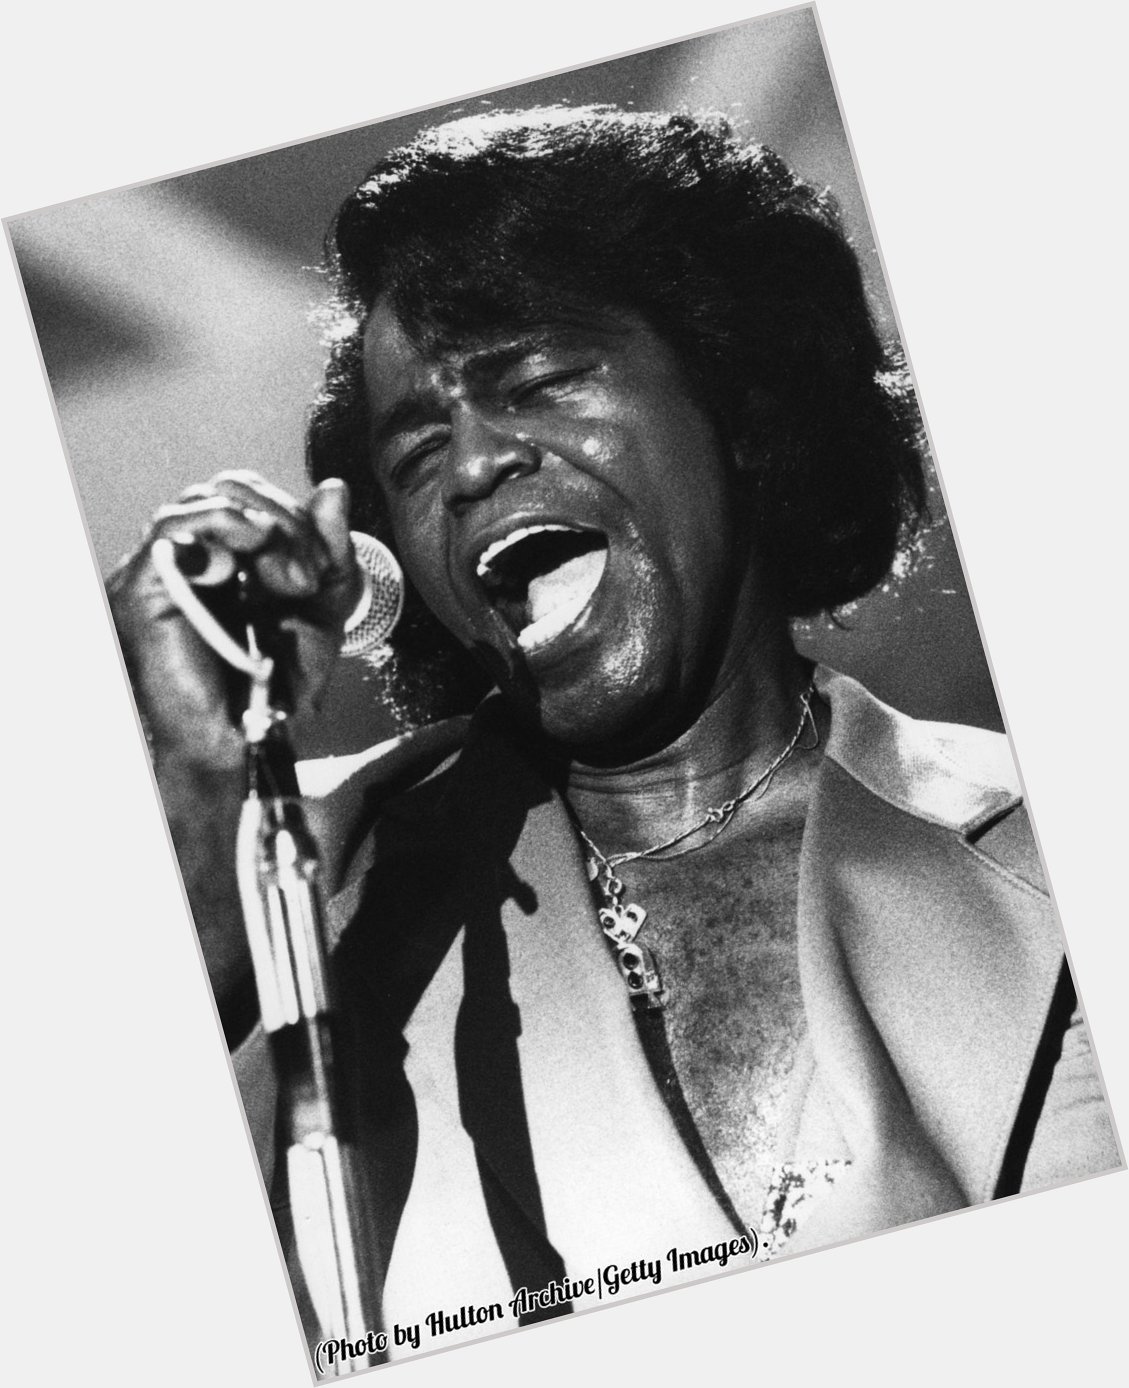 Happy Birthday to the late, great Godfather of Soul, James Brown. 